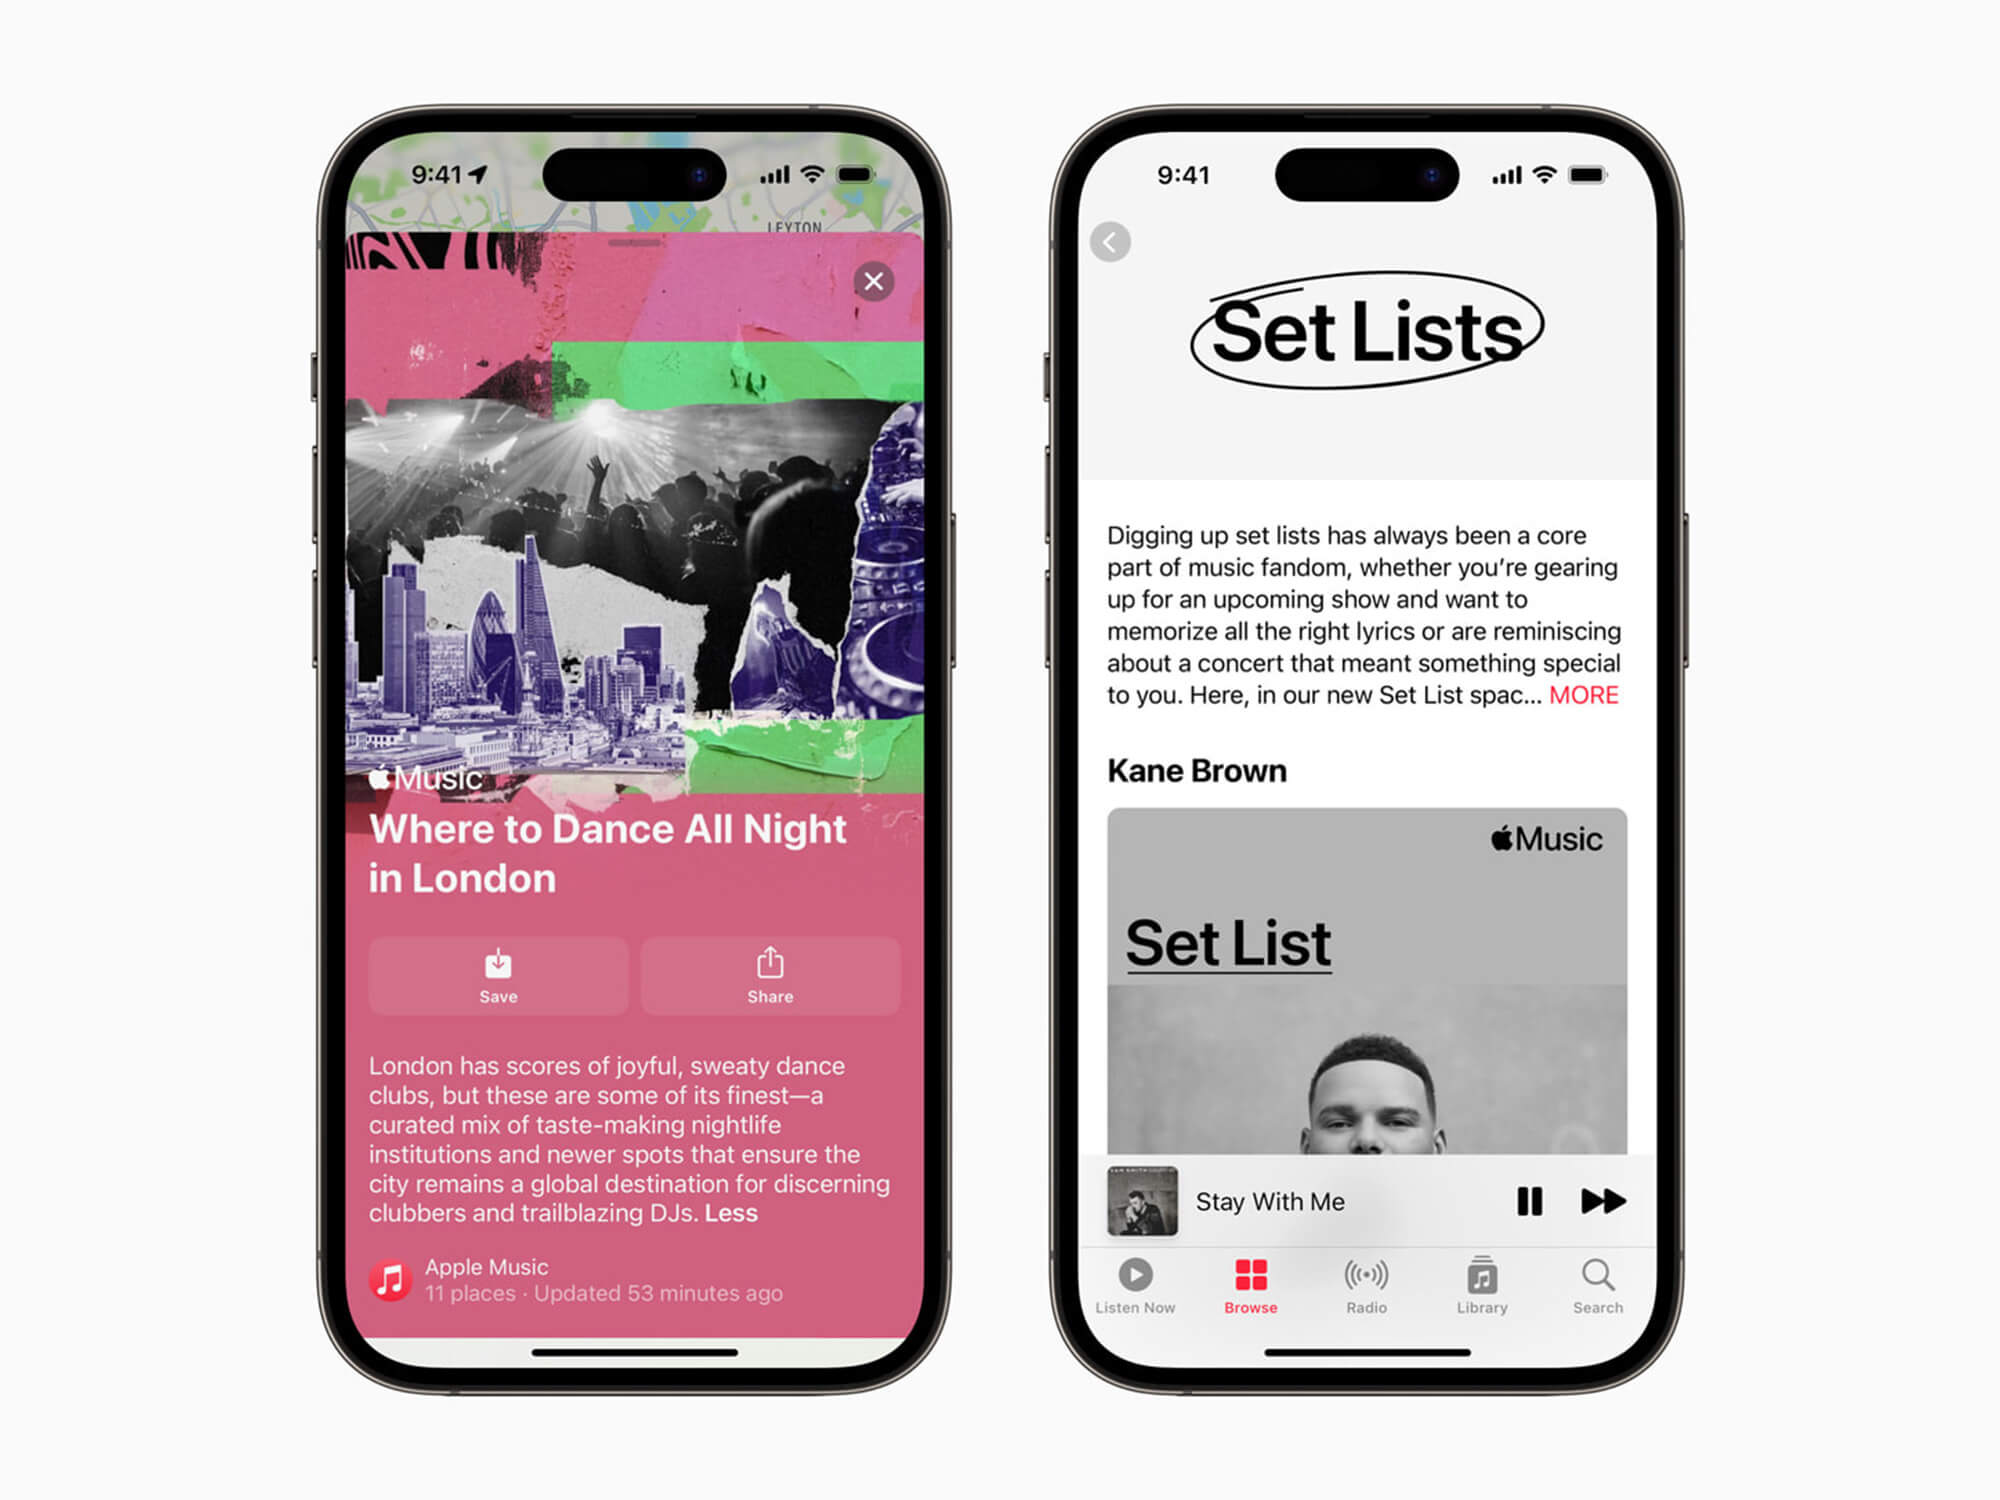 Apple's new concert and set list guides